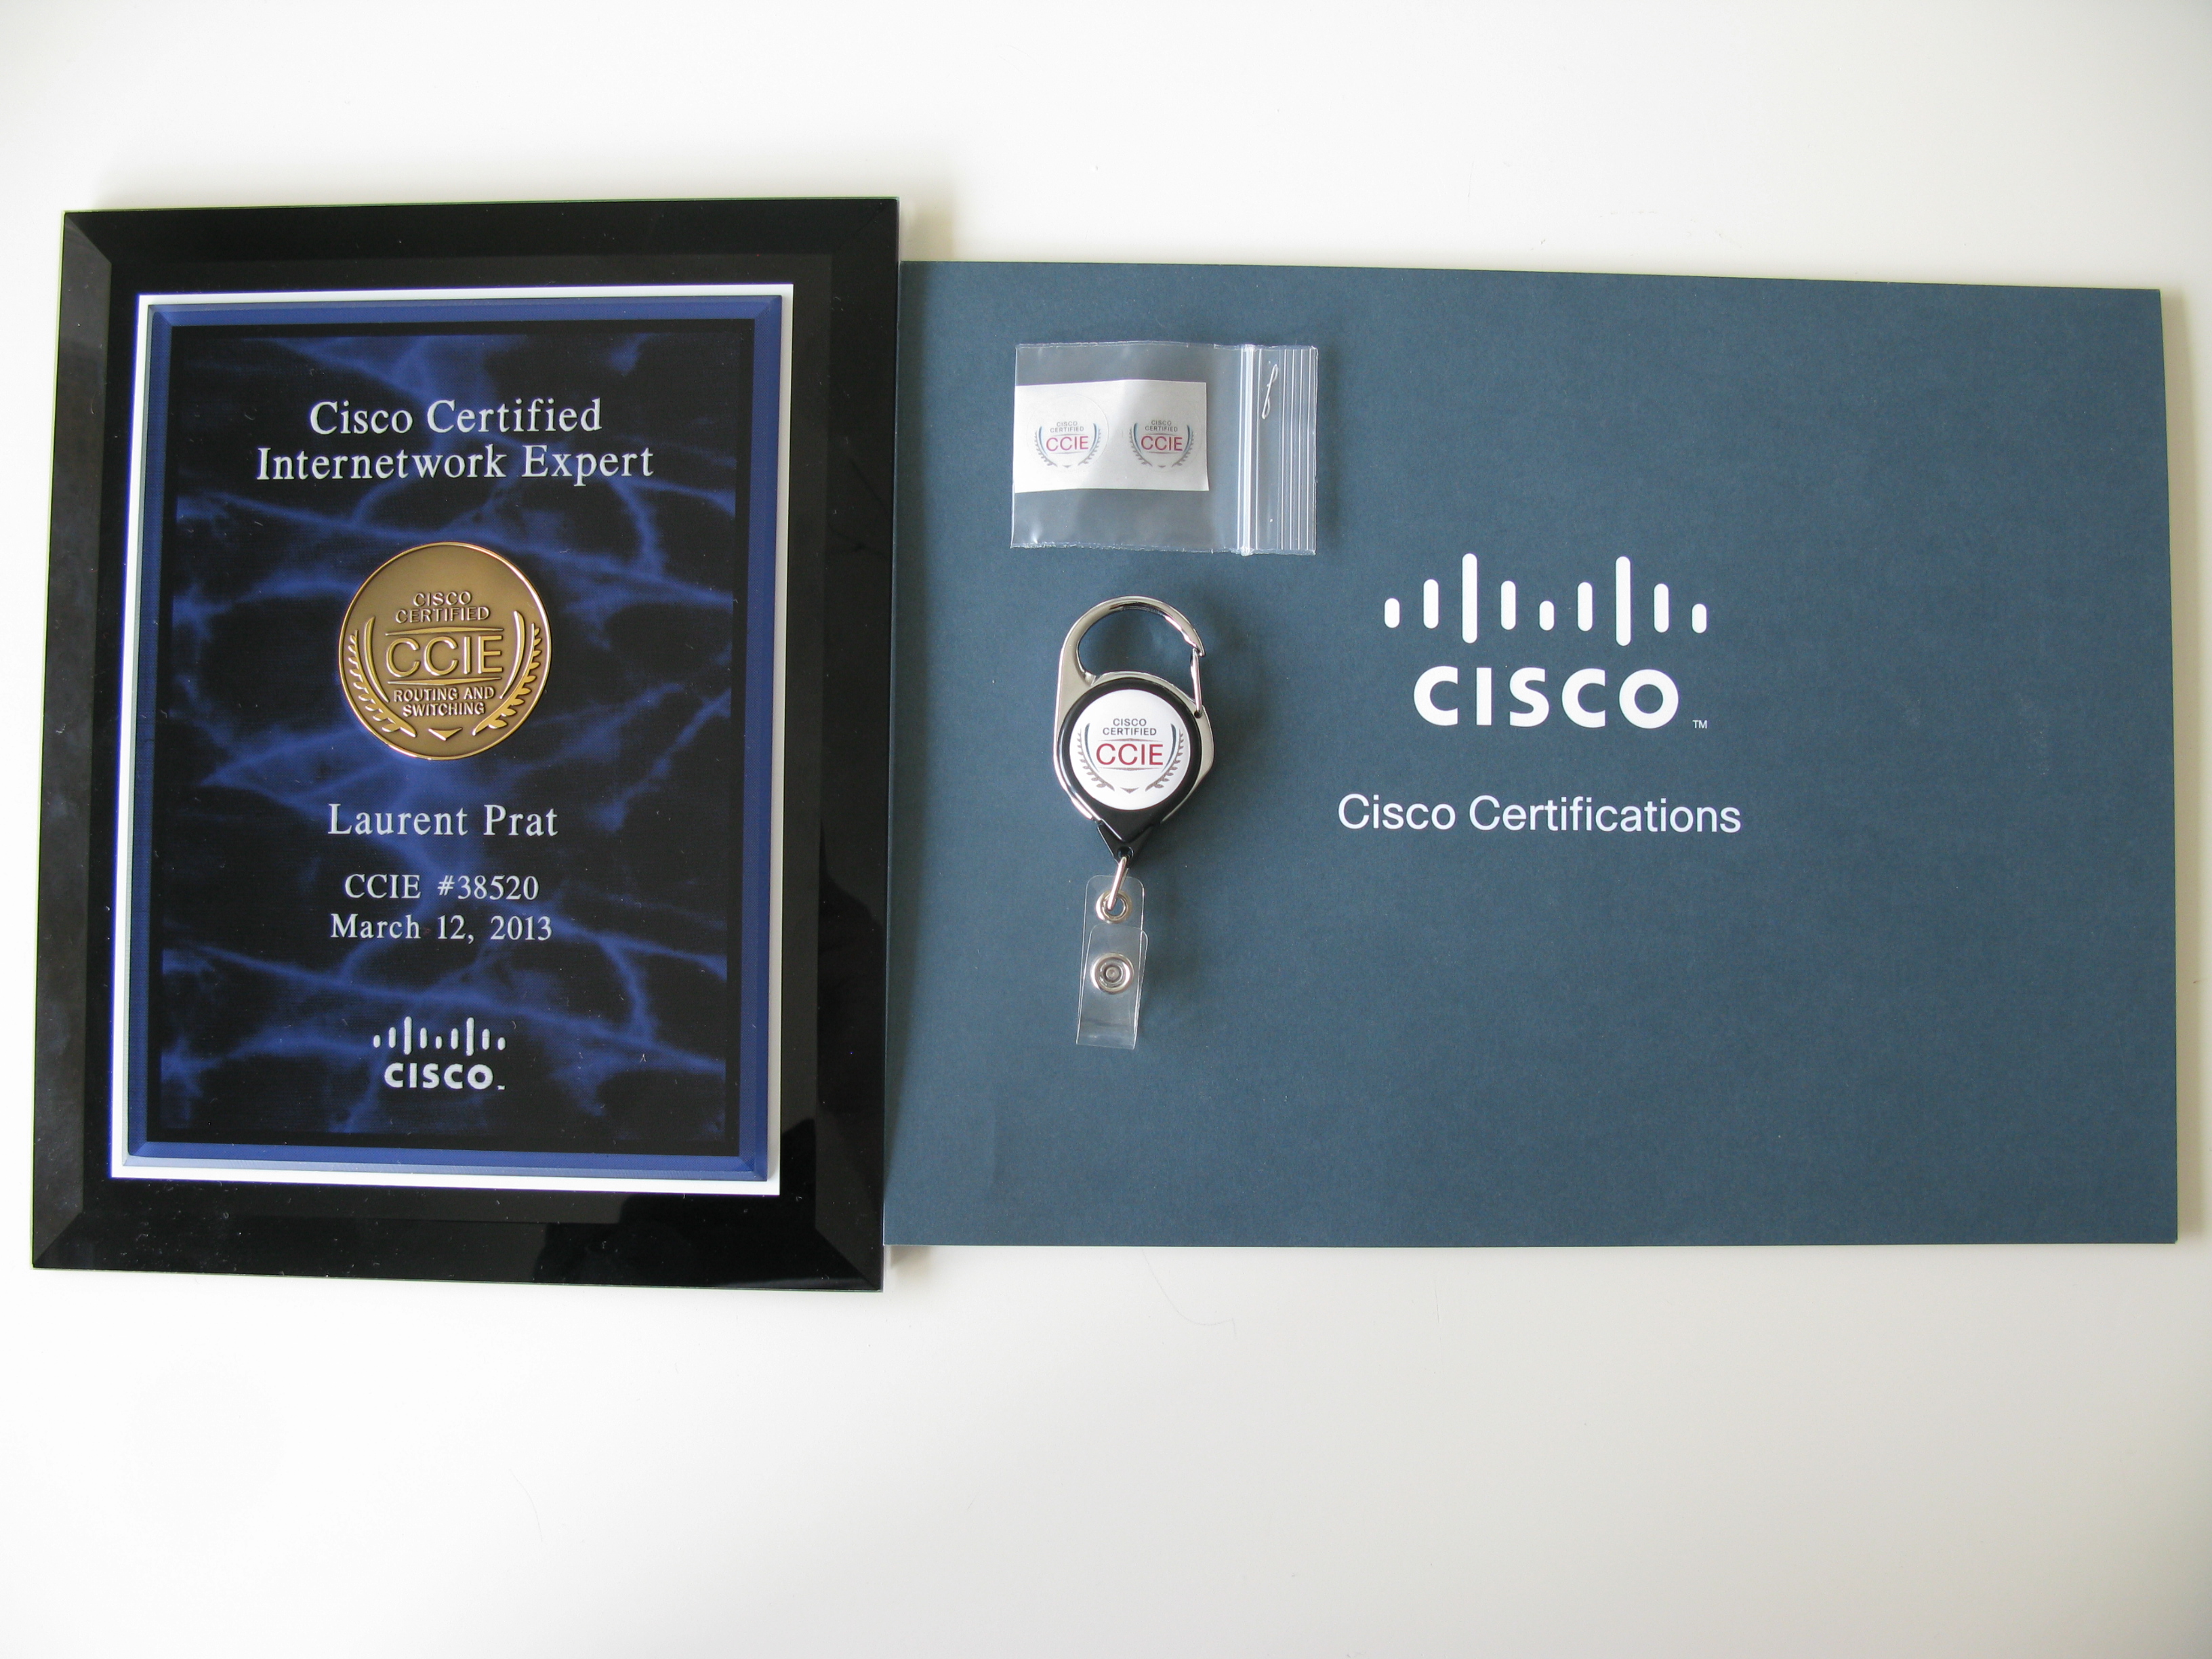 My CCIE plaque has arrived | The CCIE R&S